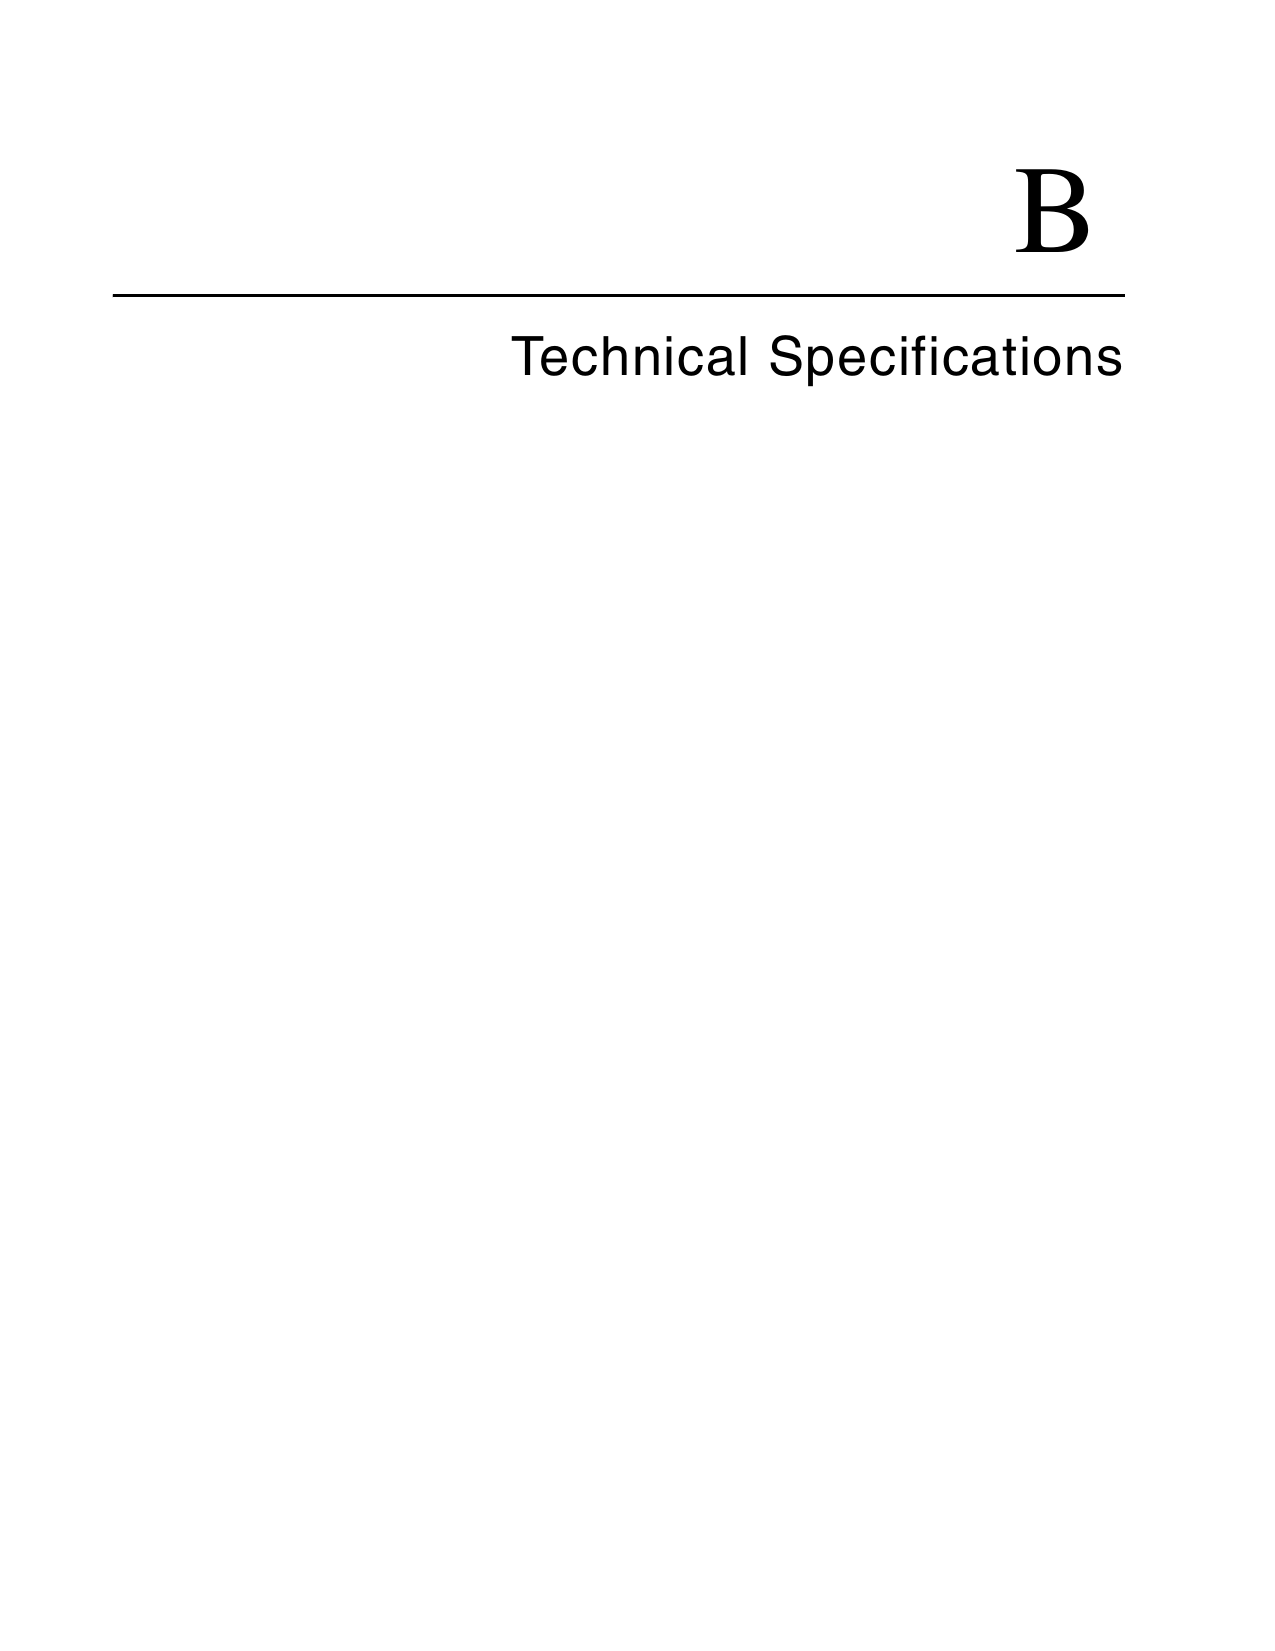 BTechnical Specifications